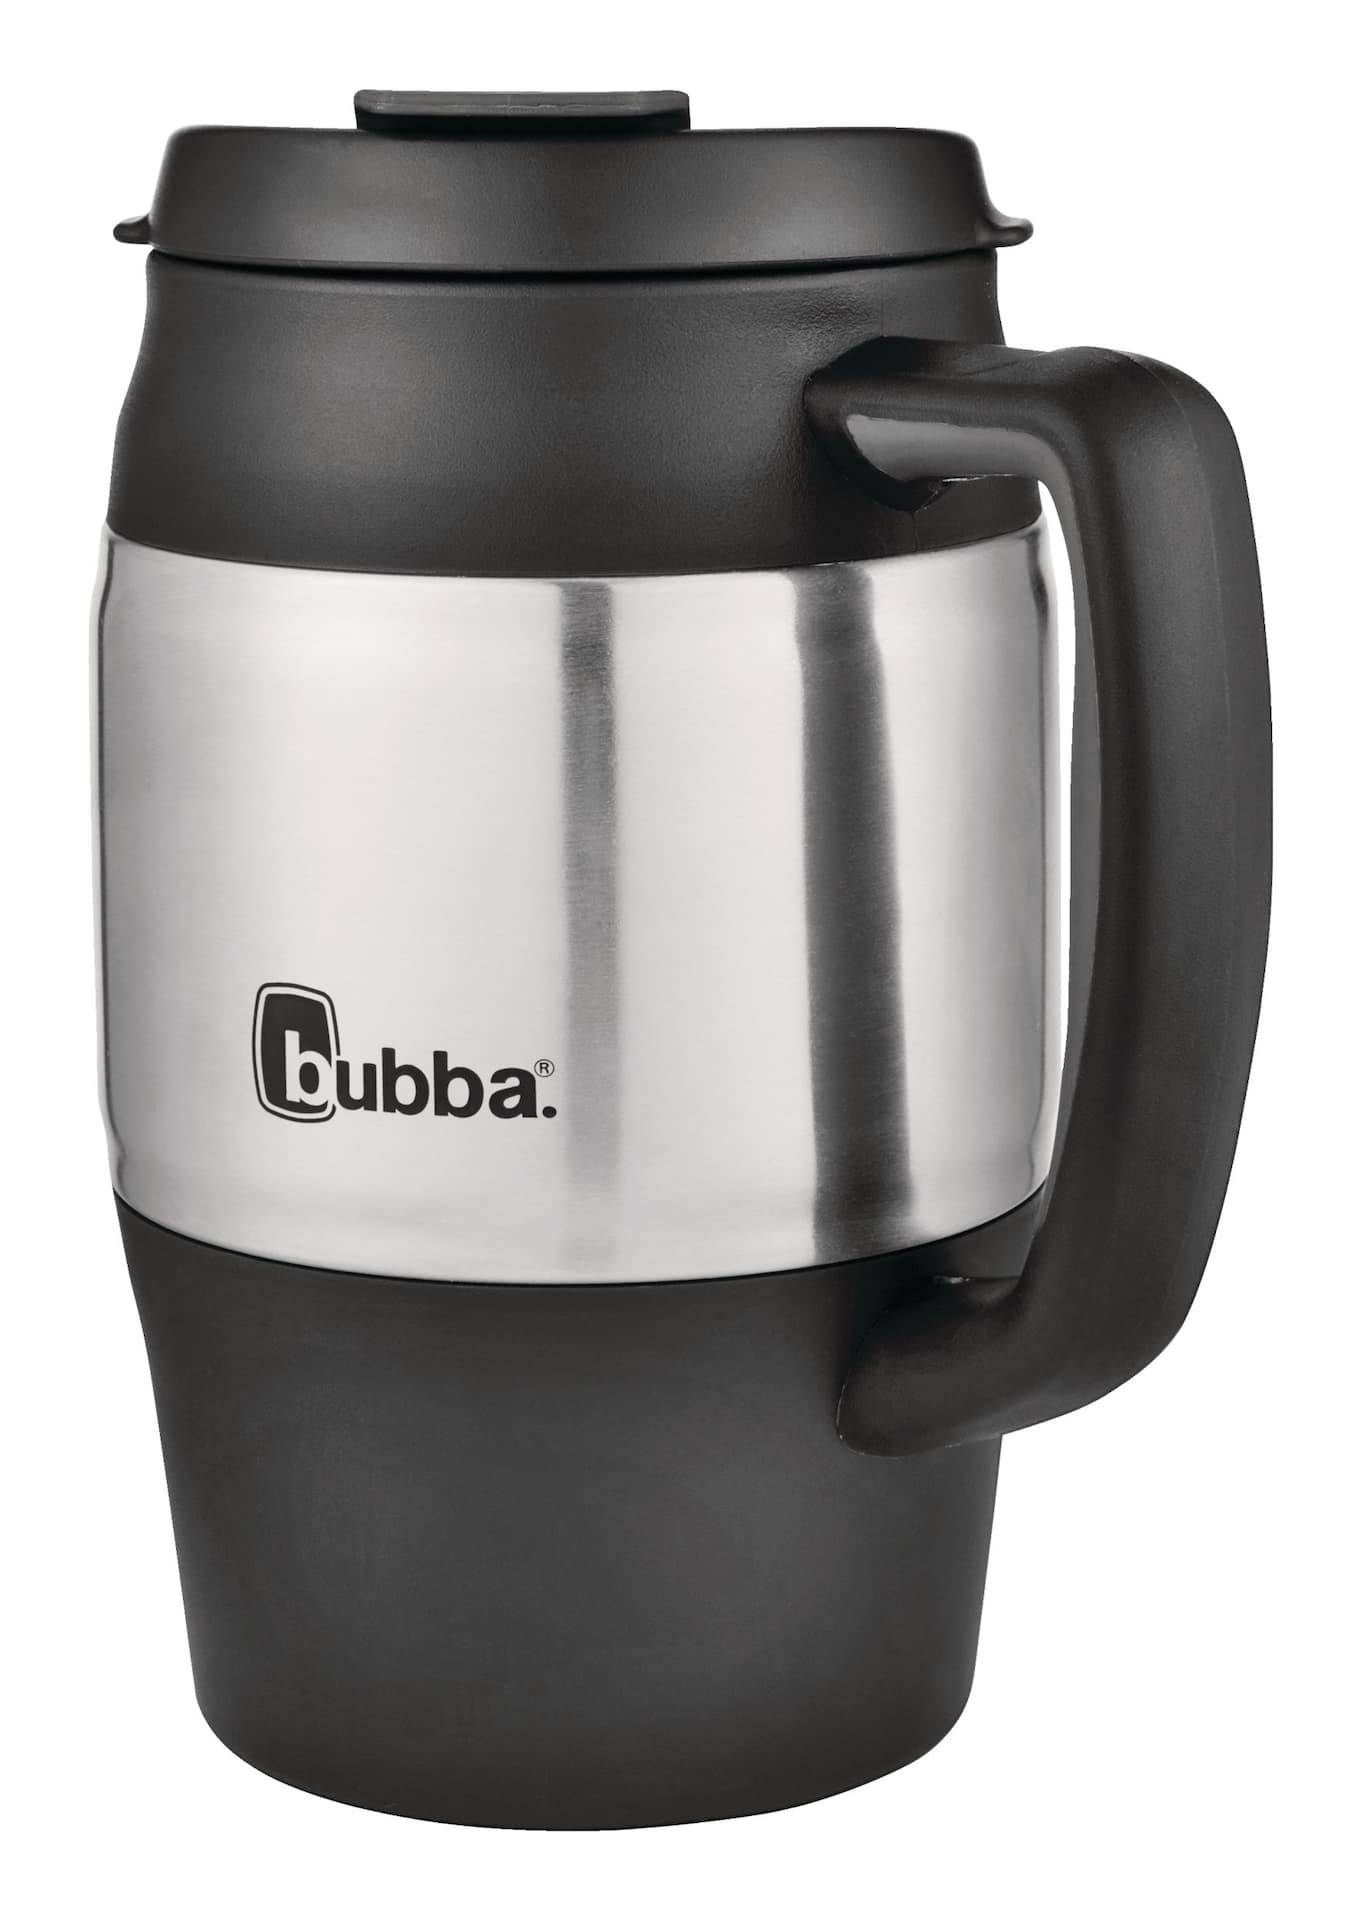 bubba Classic Insulated Mug, Keg Design with Handle, Colour May Vary, 34 oz  (1 L)